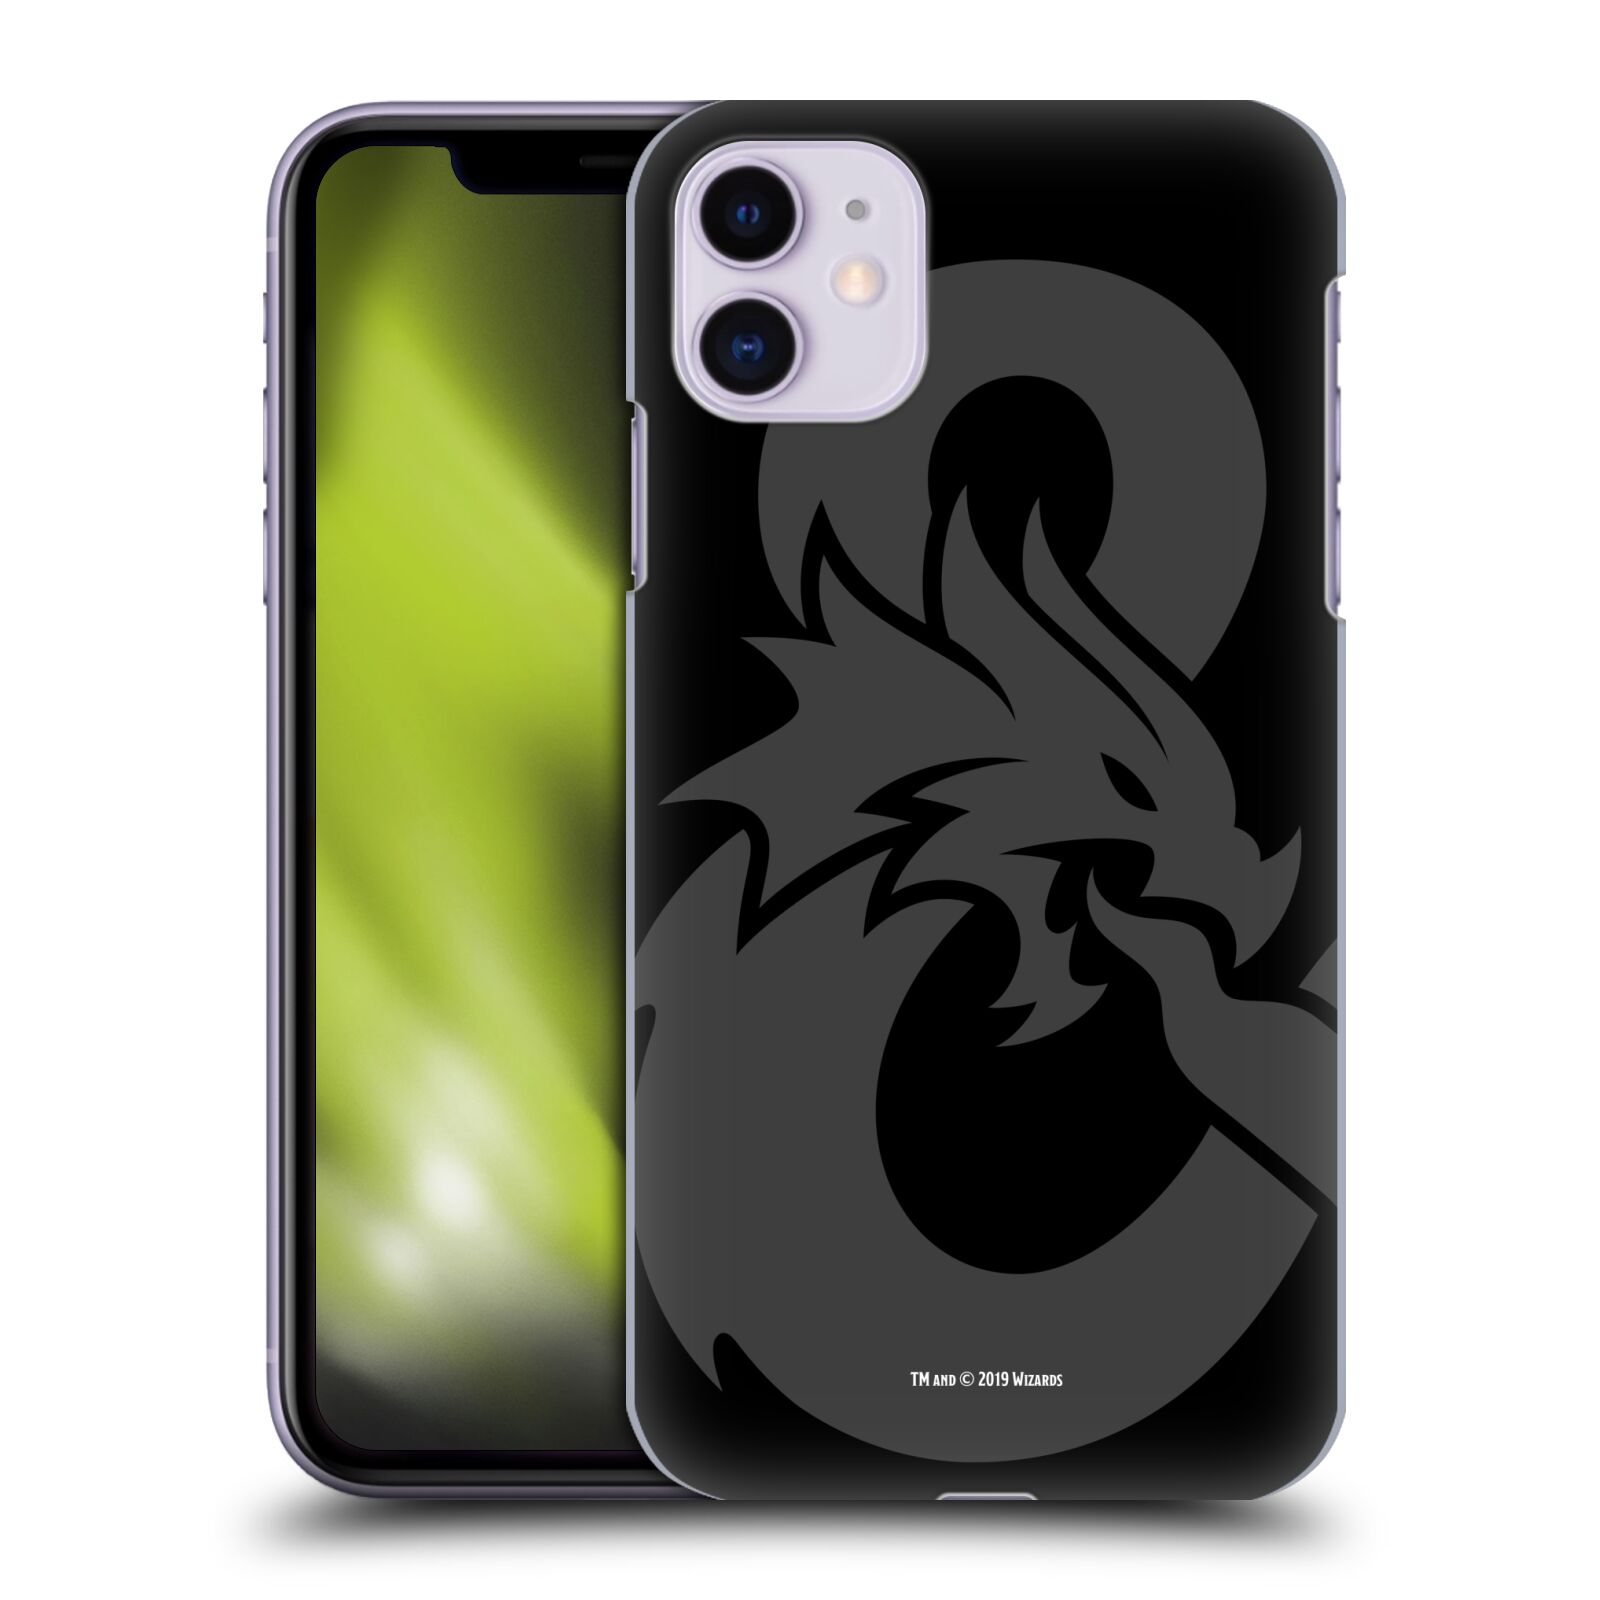 Zadní obal pro mobil Apple Iphone 11 - HEAD CASE - Fantasy - Dungeons and Dragons - Znak